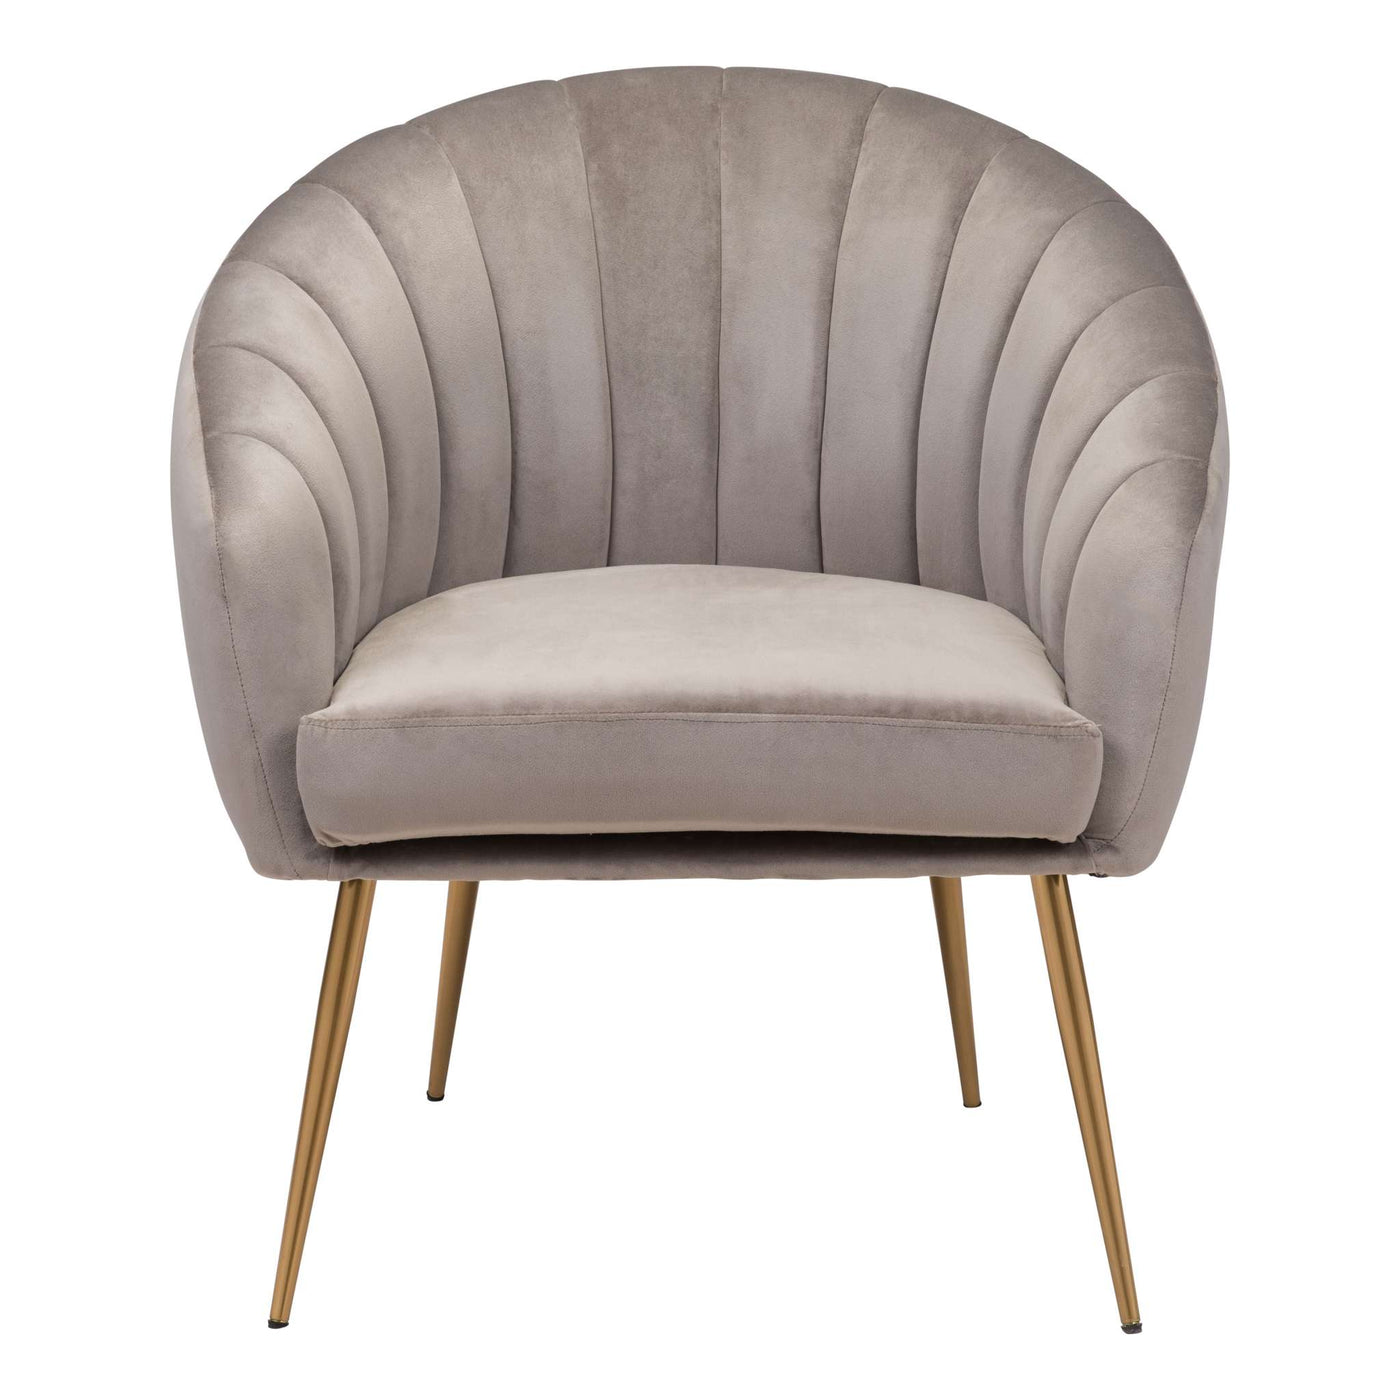 Zuo Mod Max Accent Chair